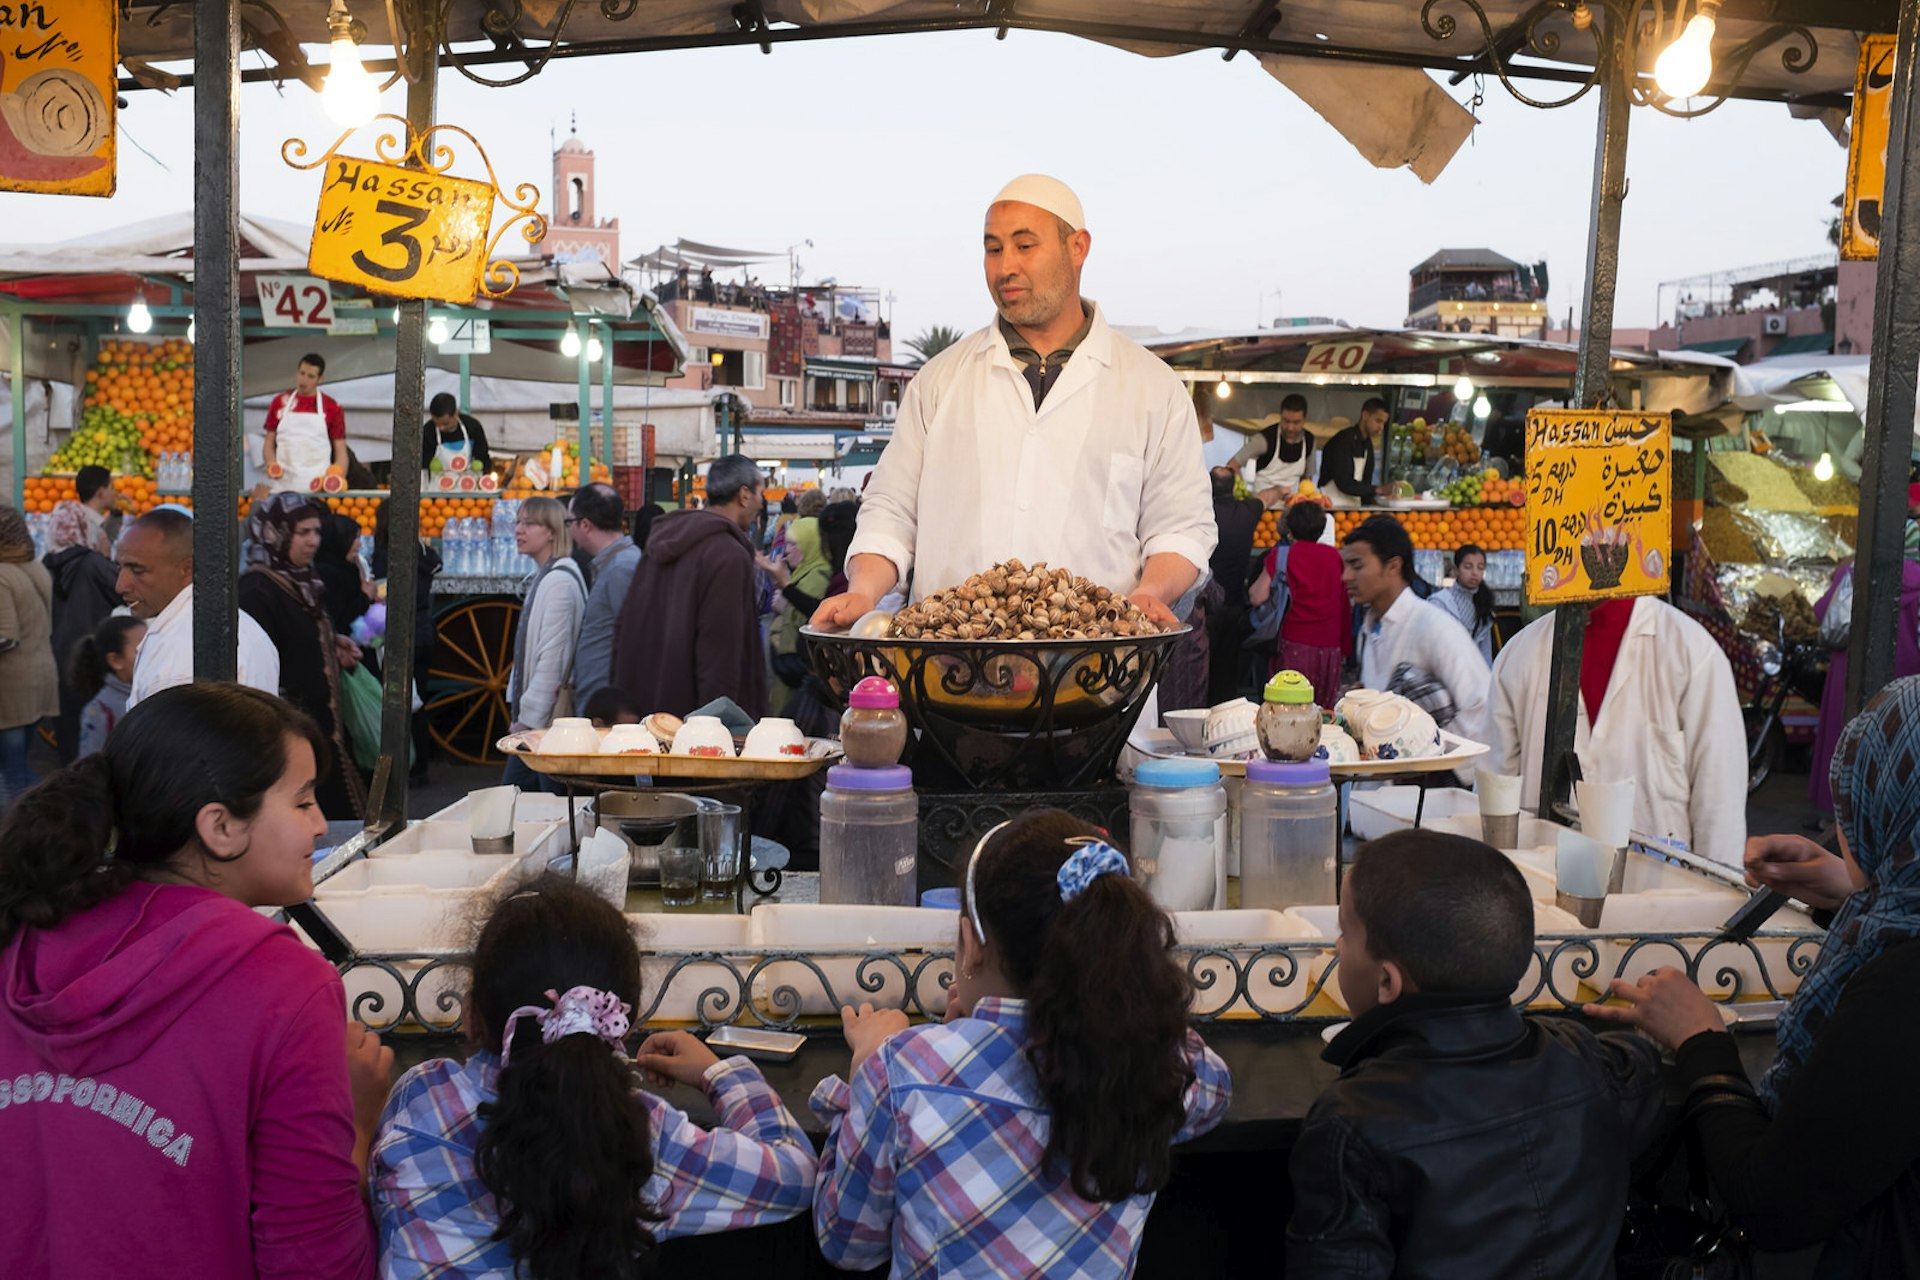 Children stand at stall where a man is selling snails © John Humble / Getty Images